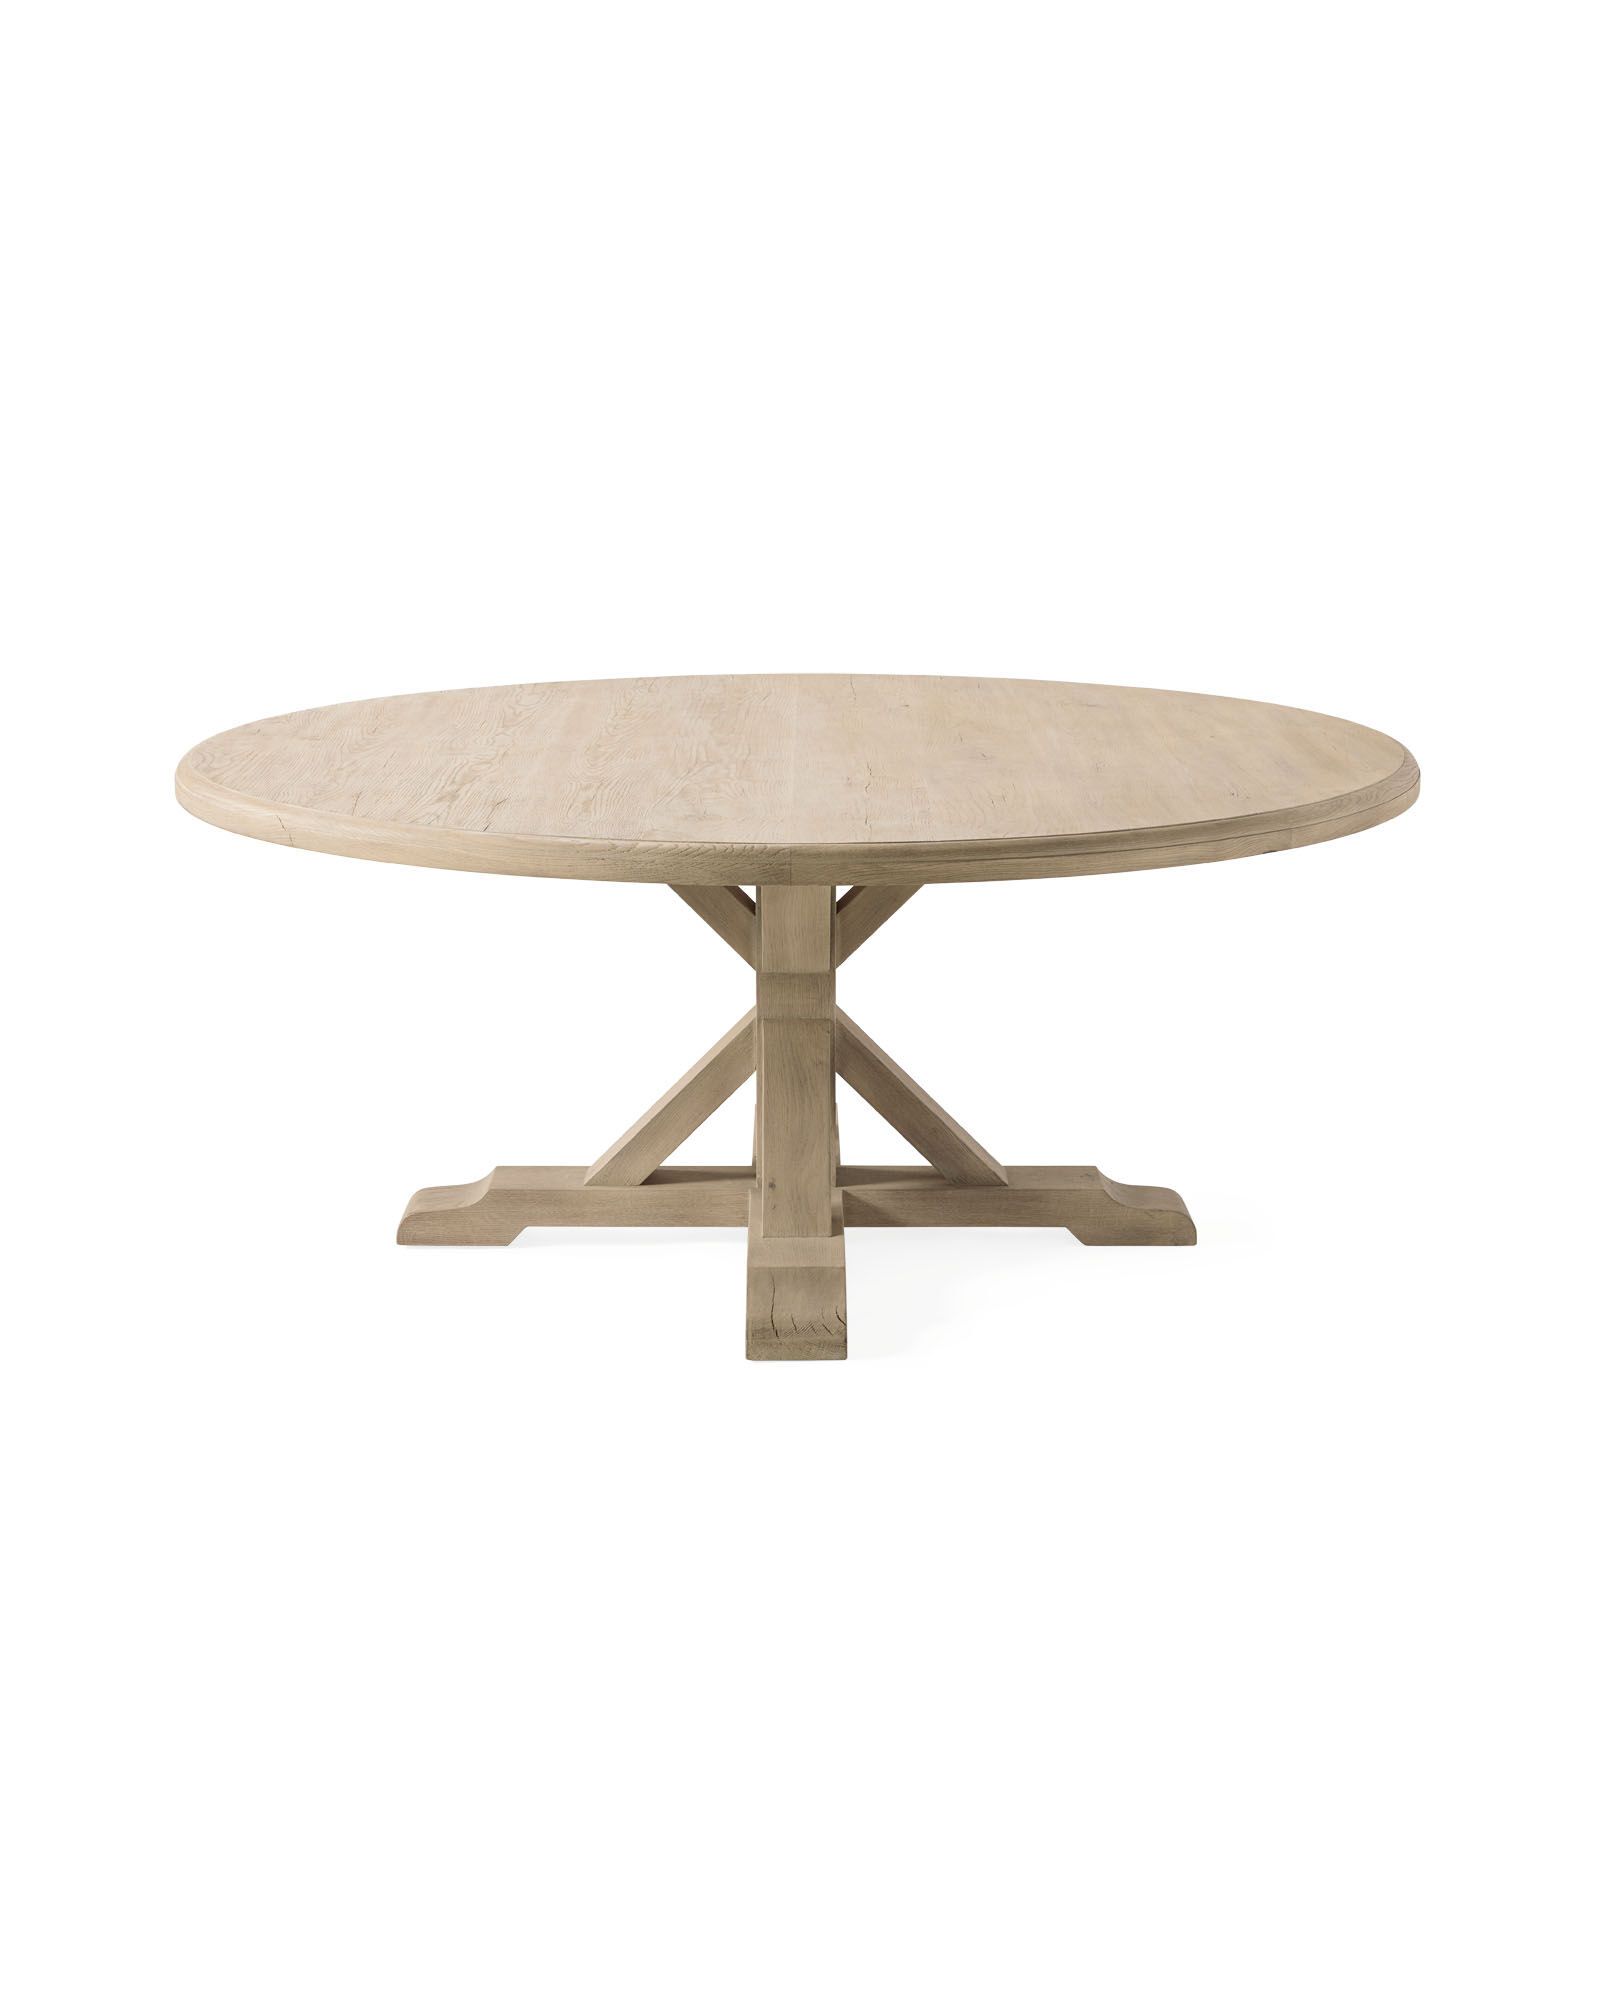 Lakehouse Round Dining Table | Serena and Lily